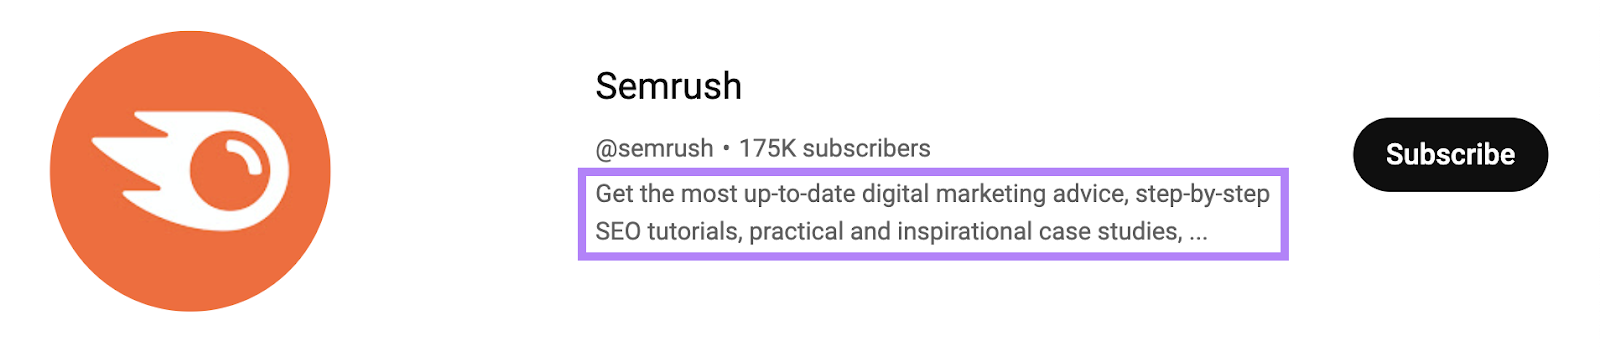 Semrush channel in YouTube search results with a section of description that reads "Get the most up-to-date digital marketing advice, step-by-step SEO tutorials, practical advice and inspirational case studies, ..."